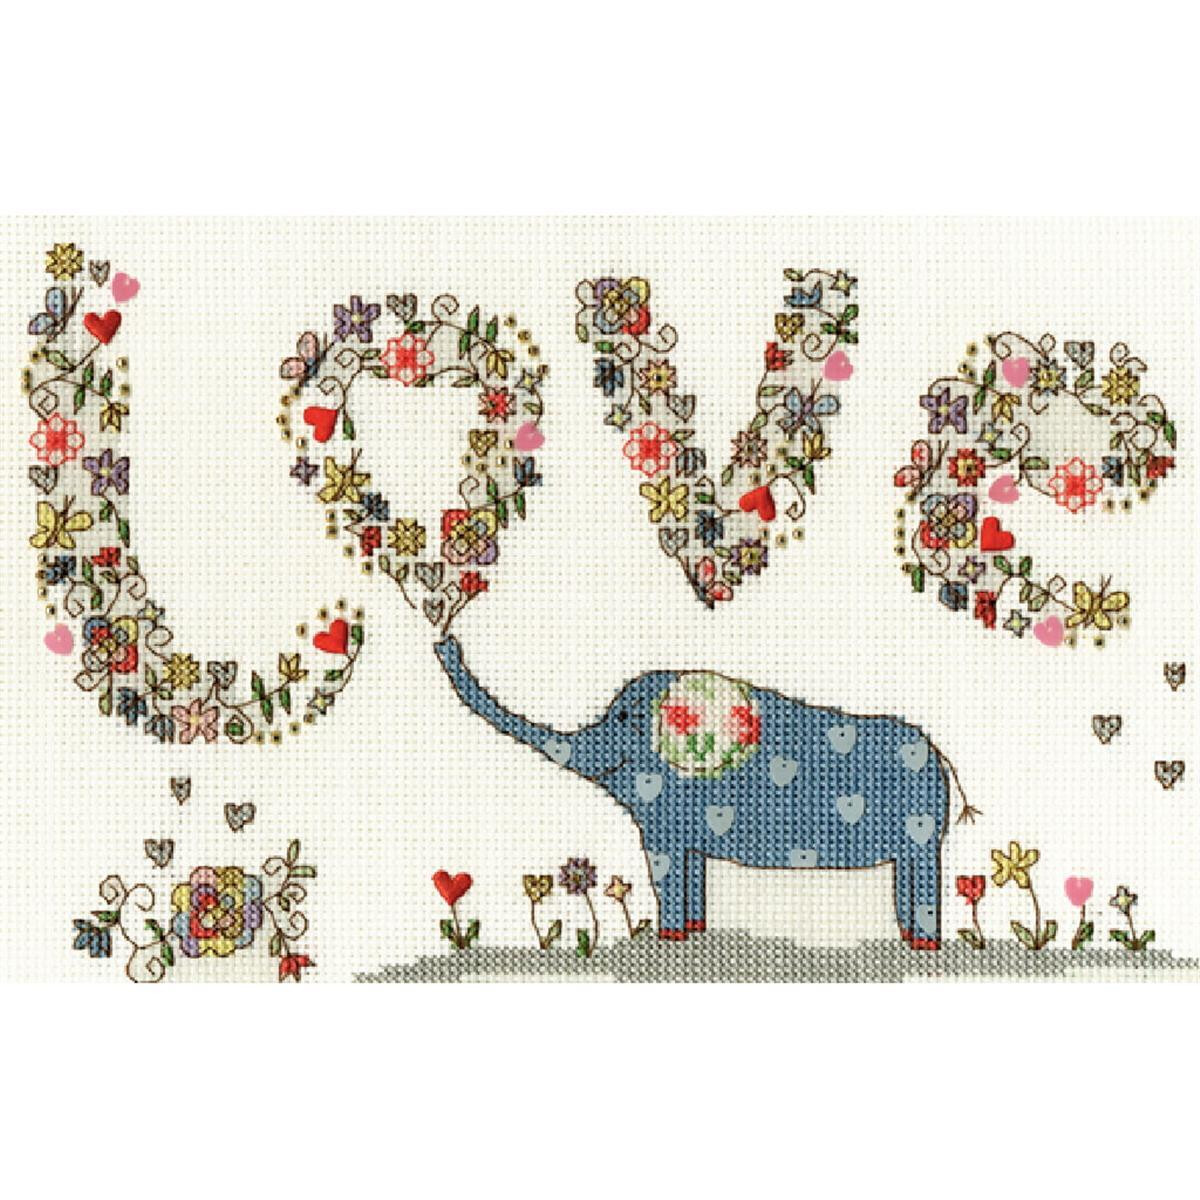 Bothy Threads counted cross stitch Kit "Love Elly...